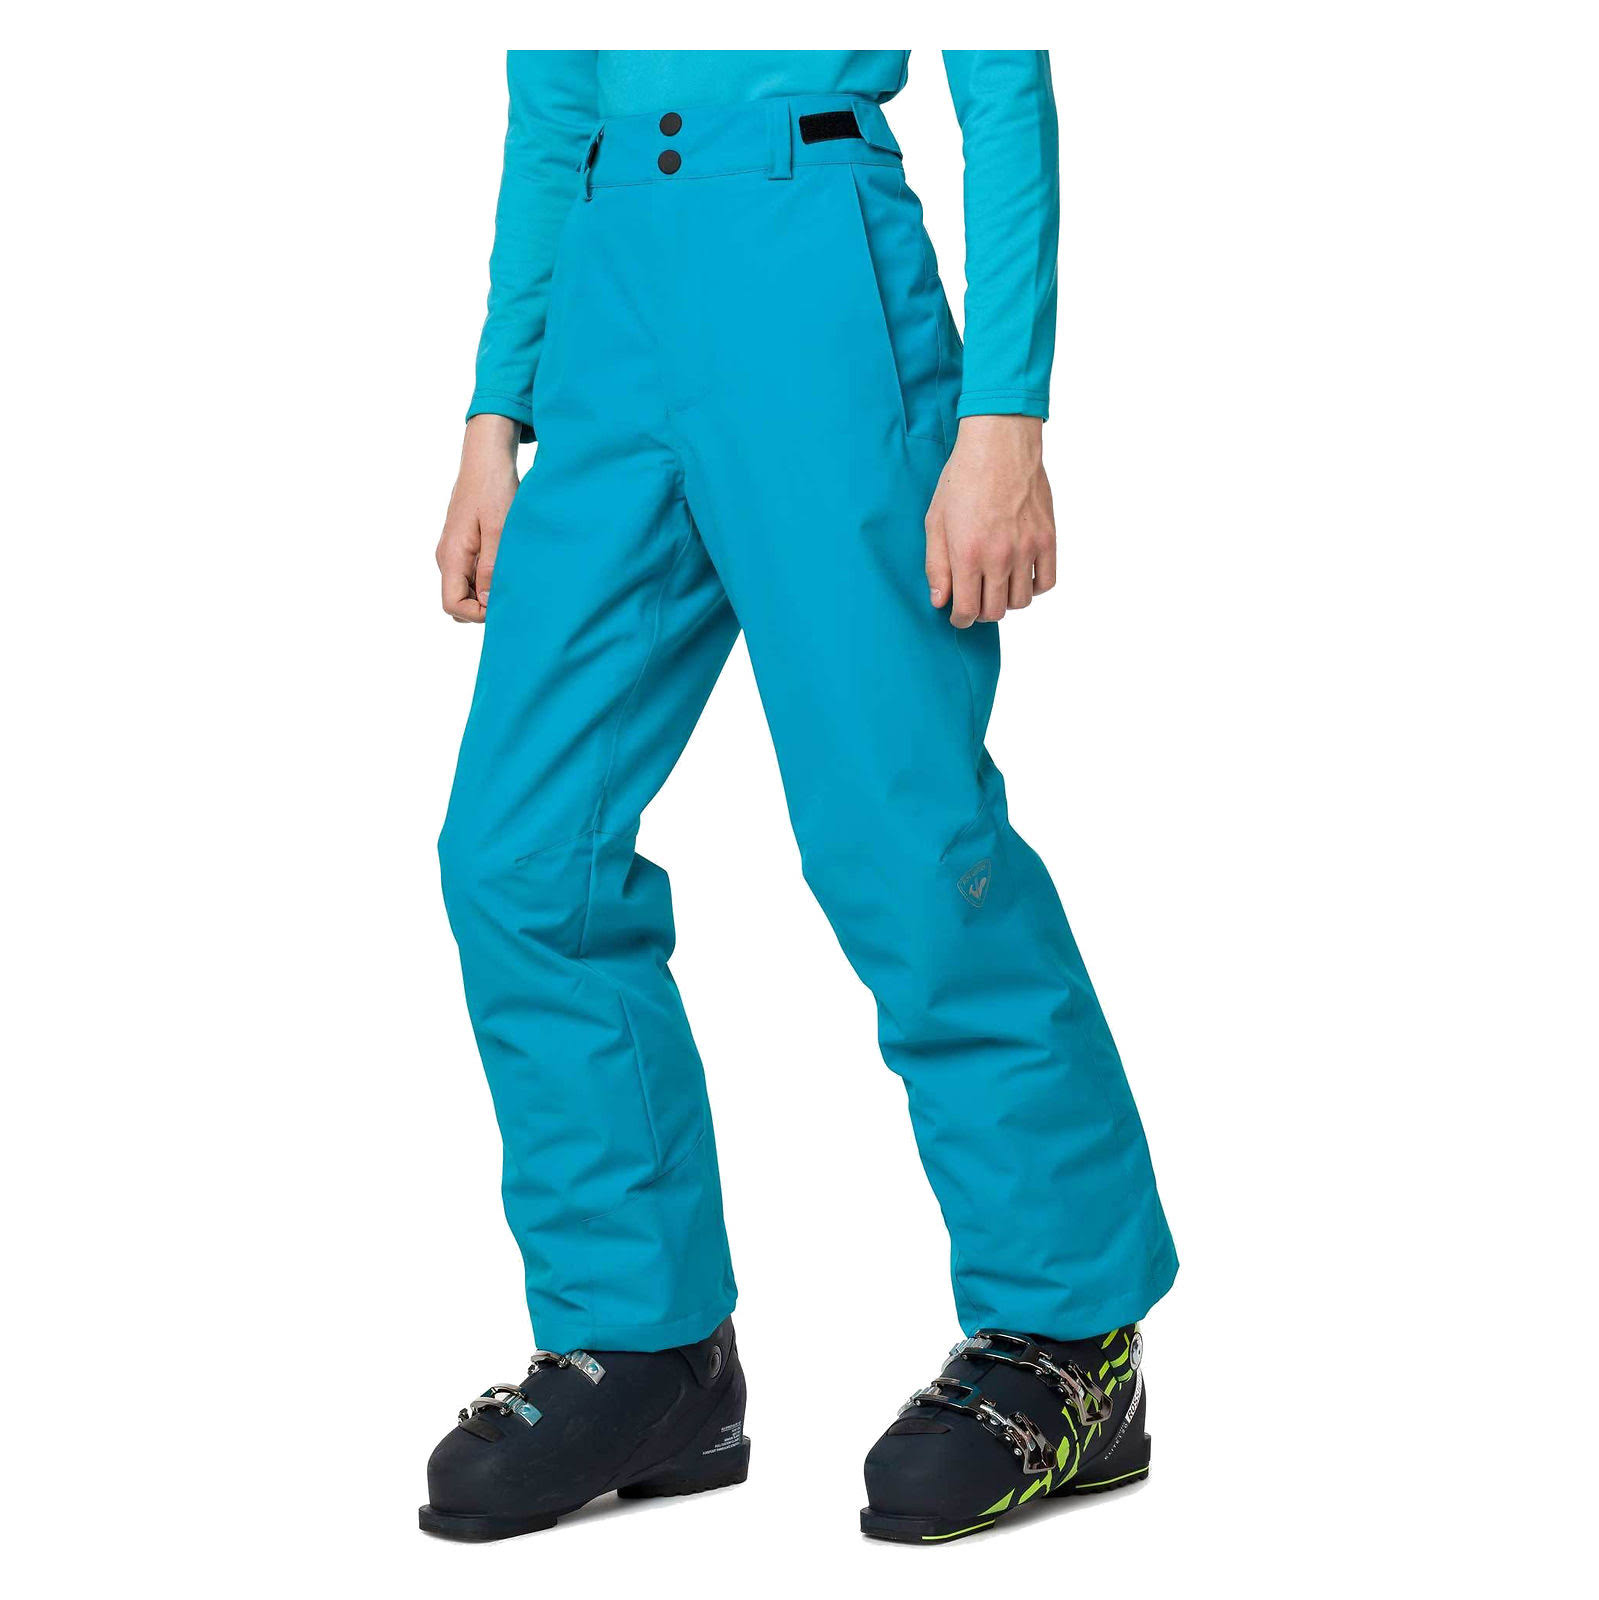 Rossignol Ski Trousers Turquoise Blue Girls - 10